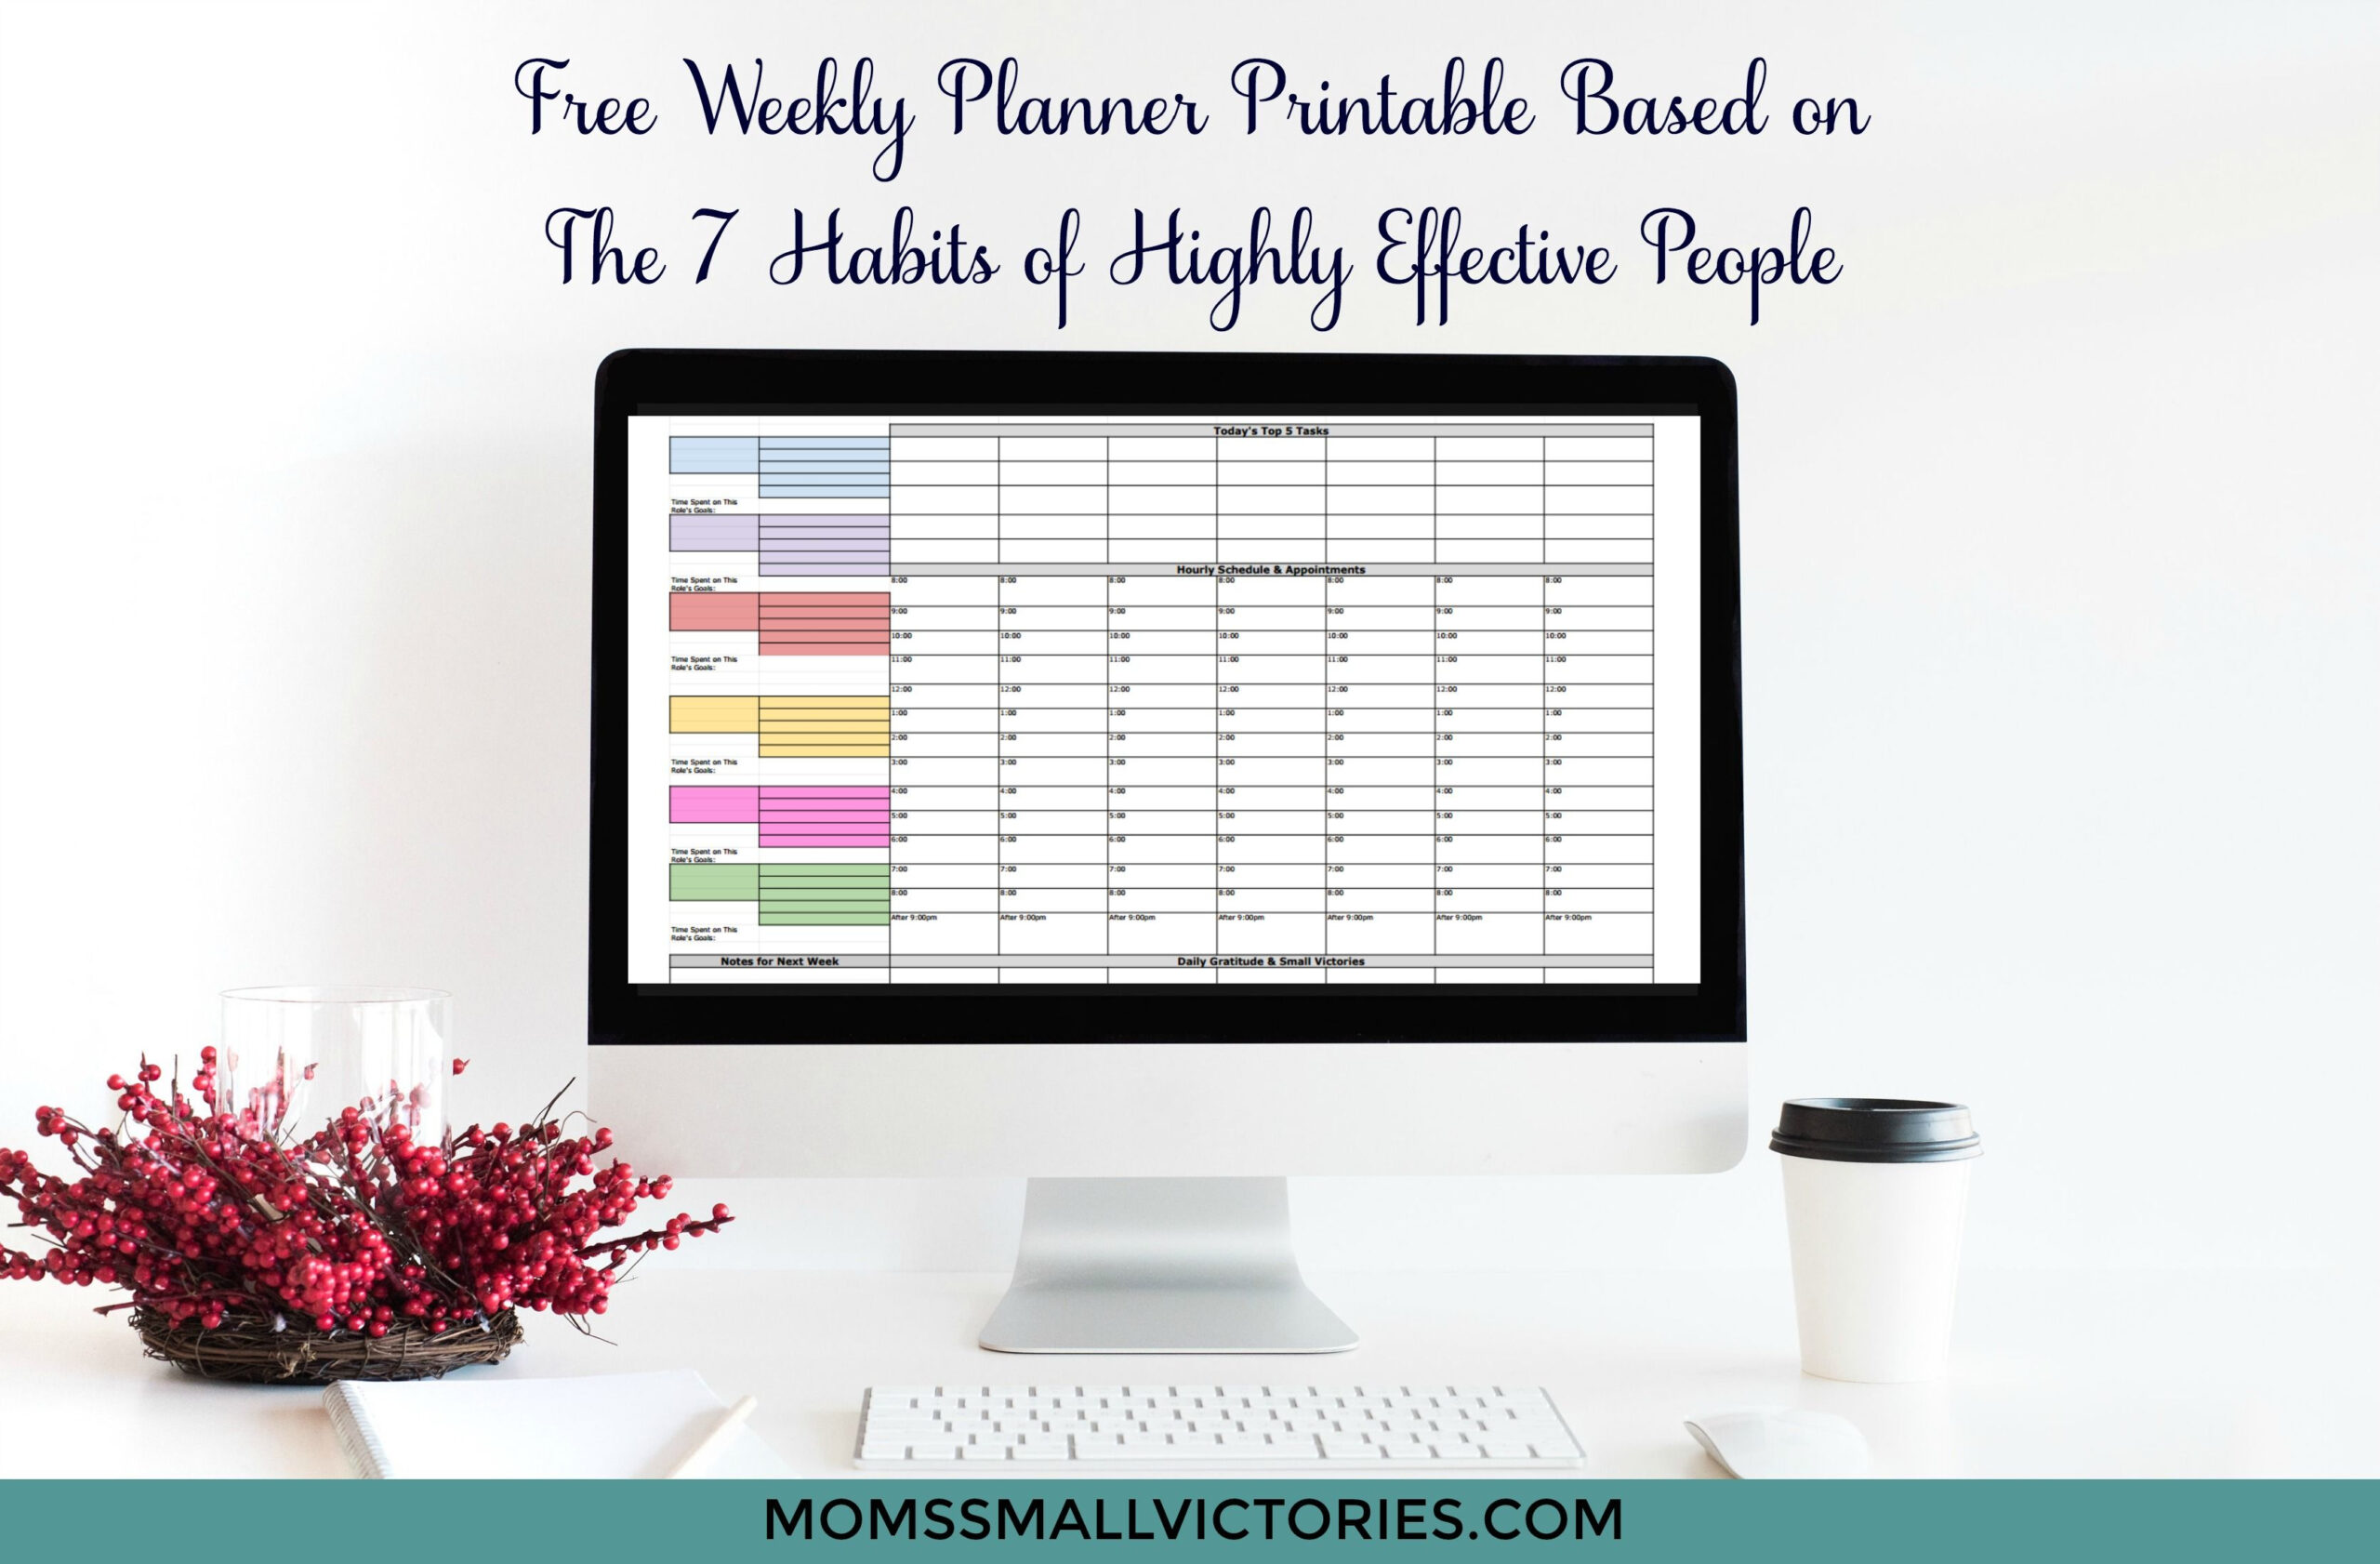 Free Weekly Planner Based On The 7 Habits Of Highly